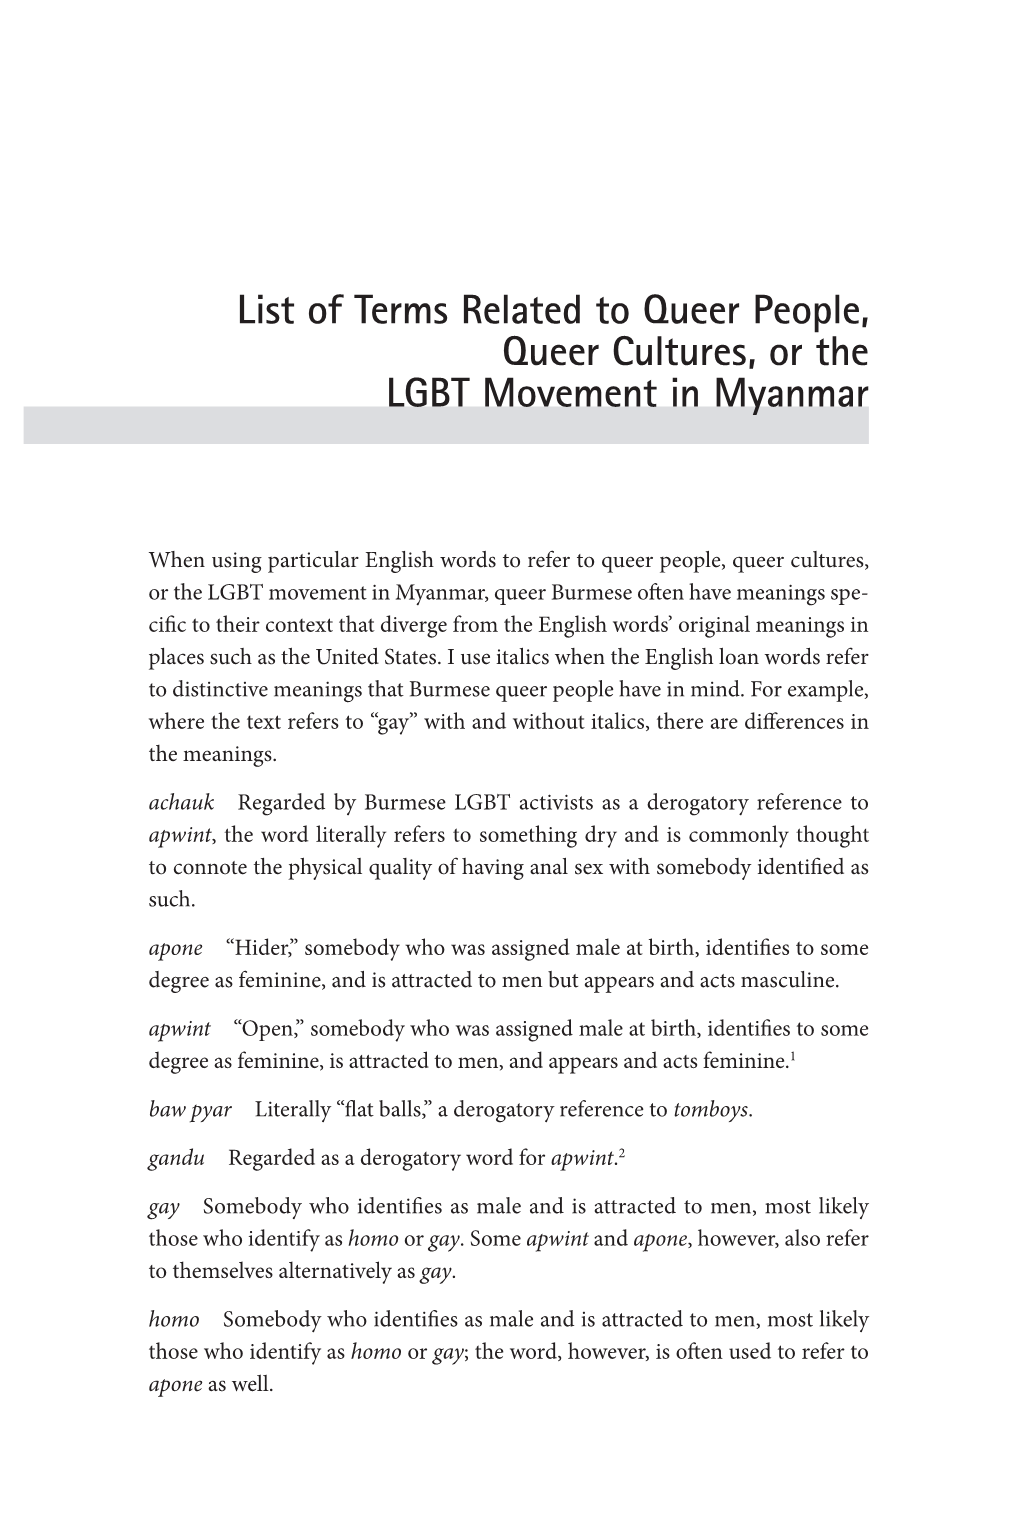 List of Terms Related to Queer People, Queer Cultures, Or the LGBT Movement in Myanmar